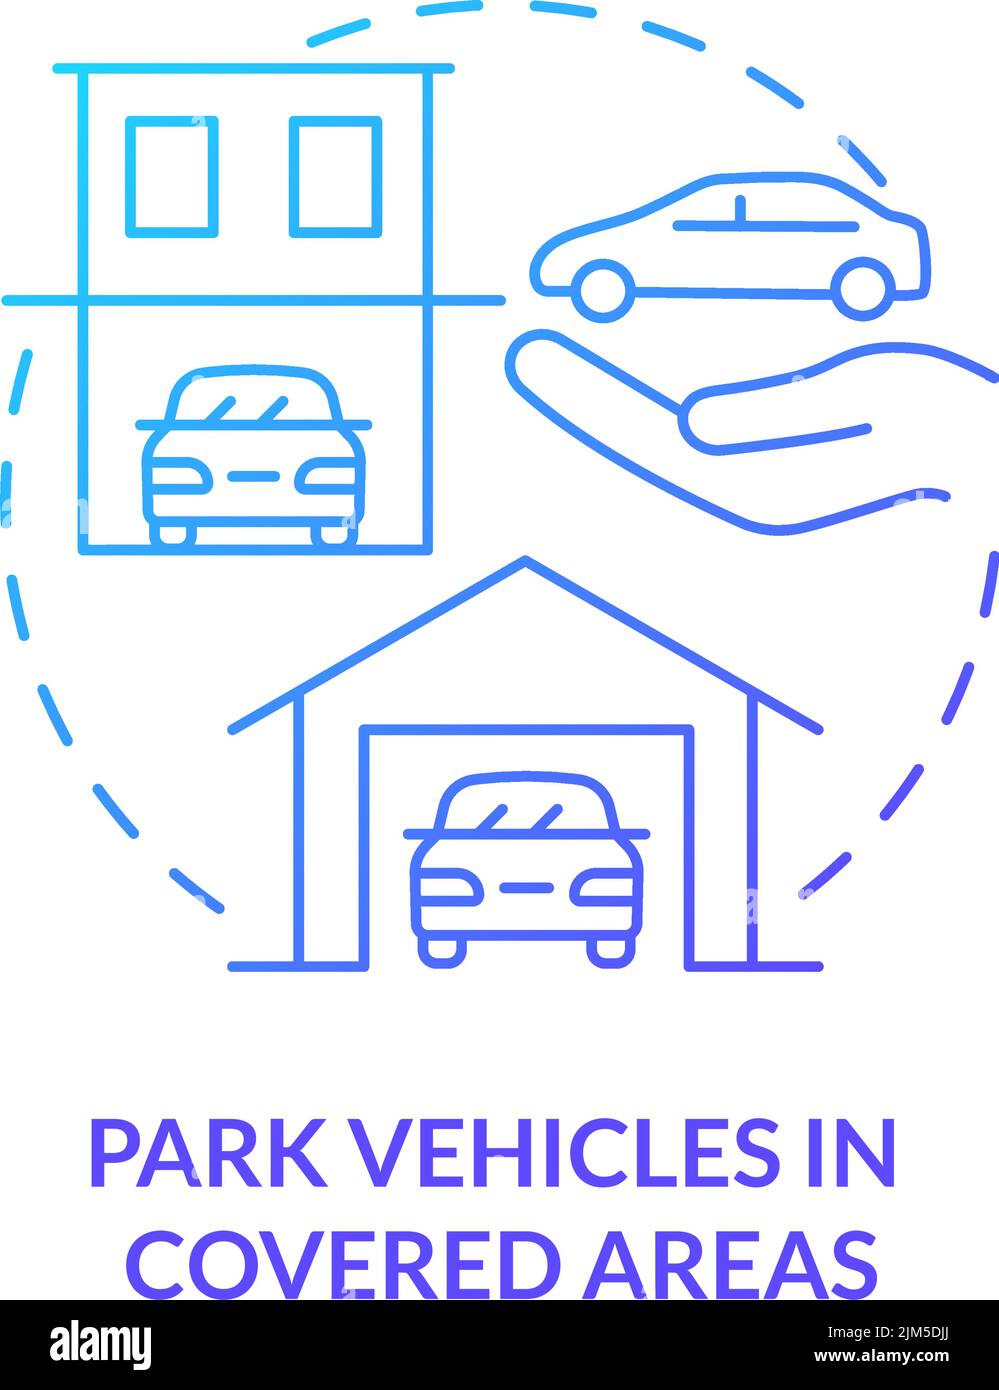 Park vehicles in covered areas blue gradient concept icon Stock Vector